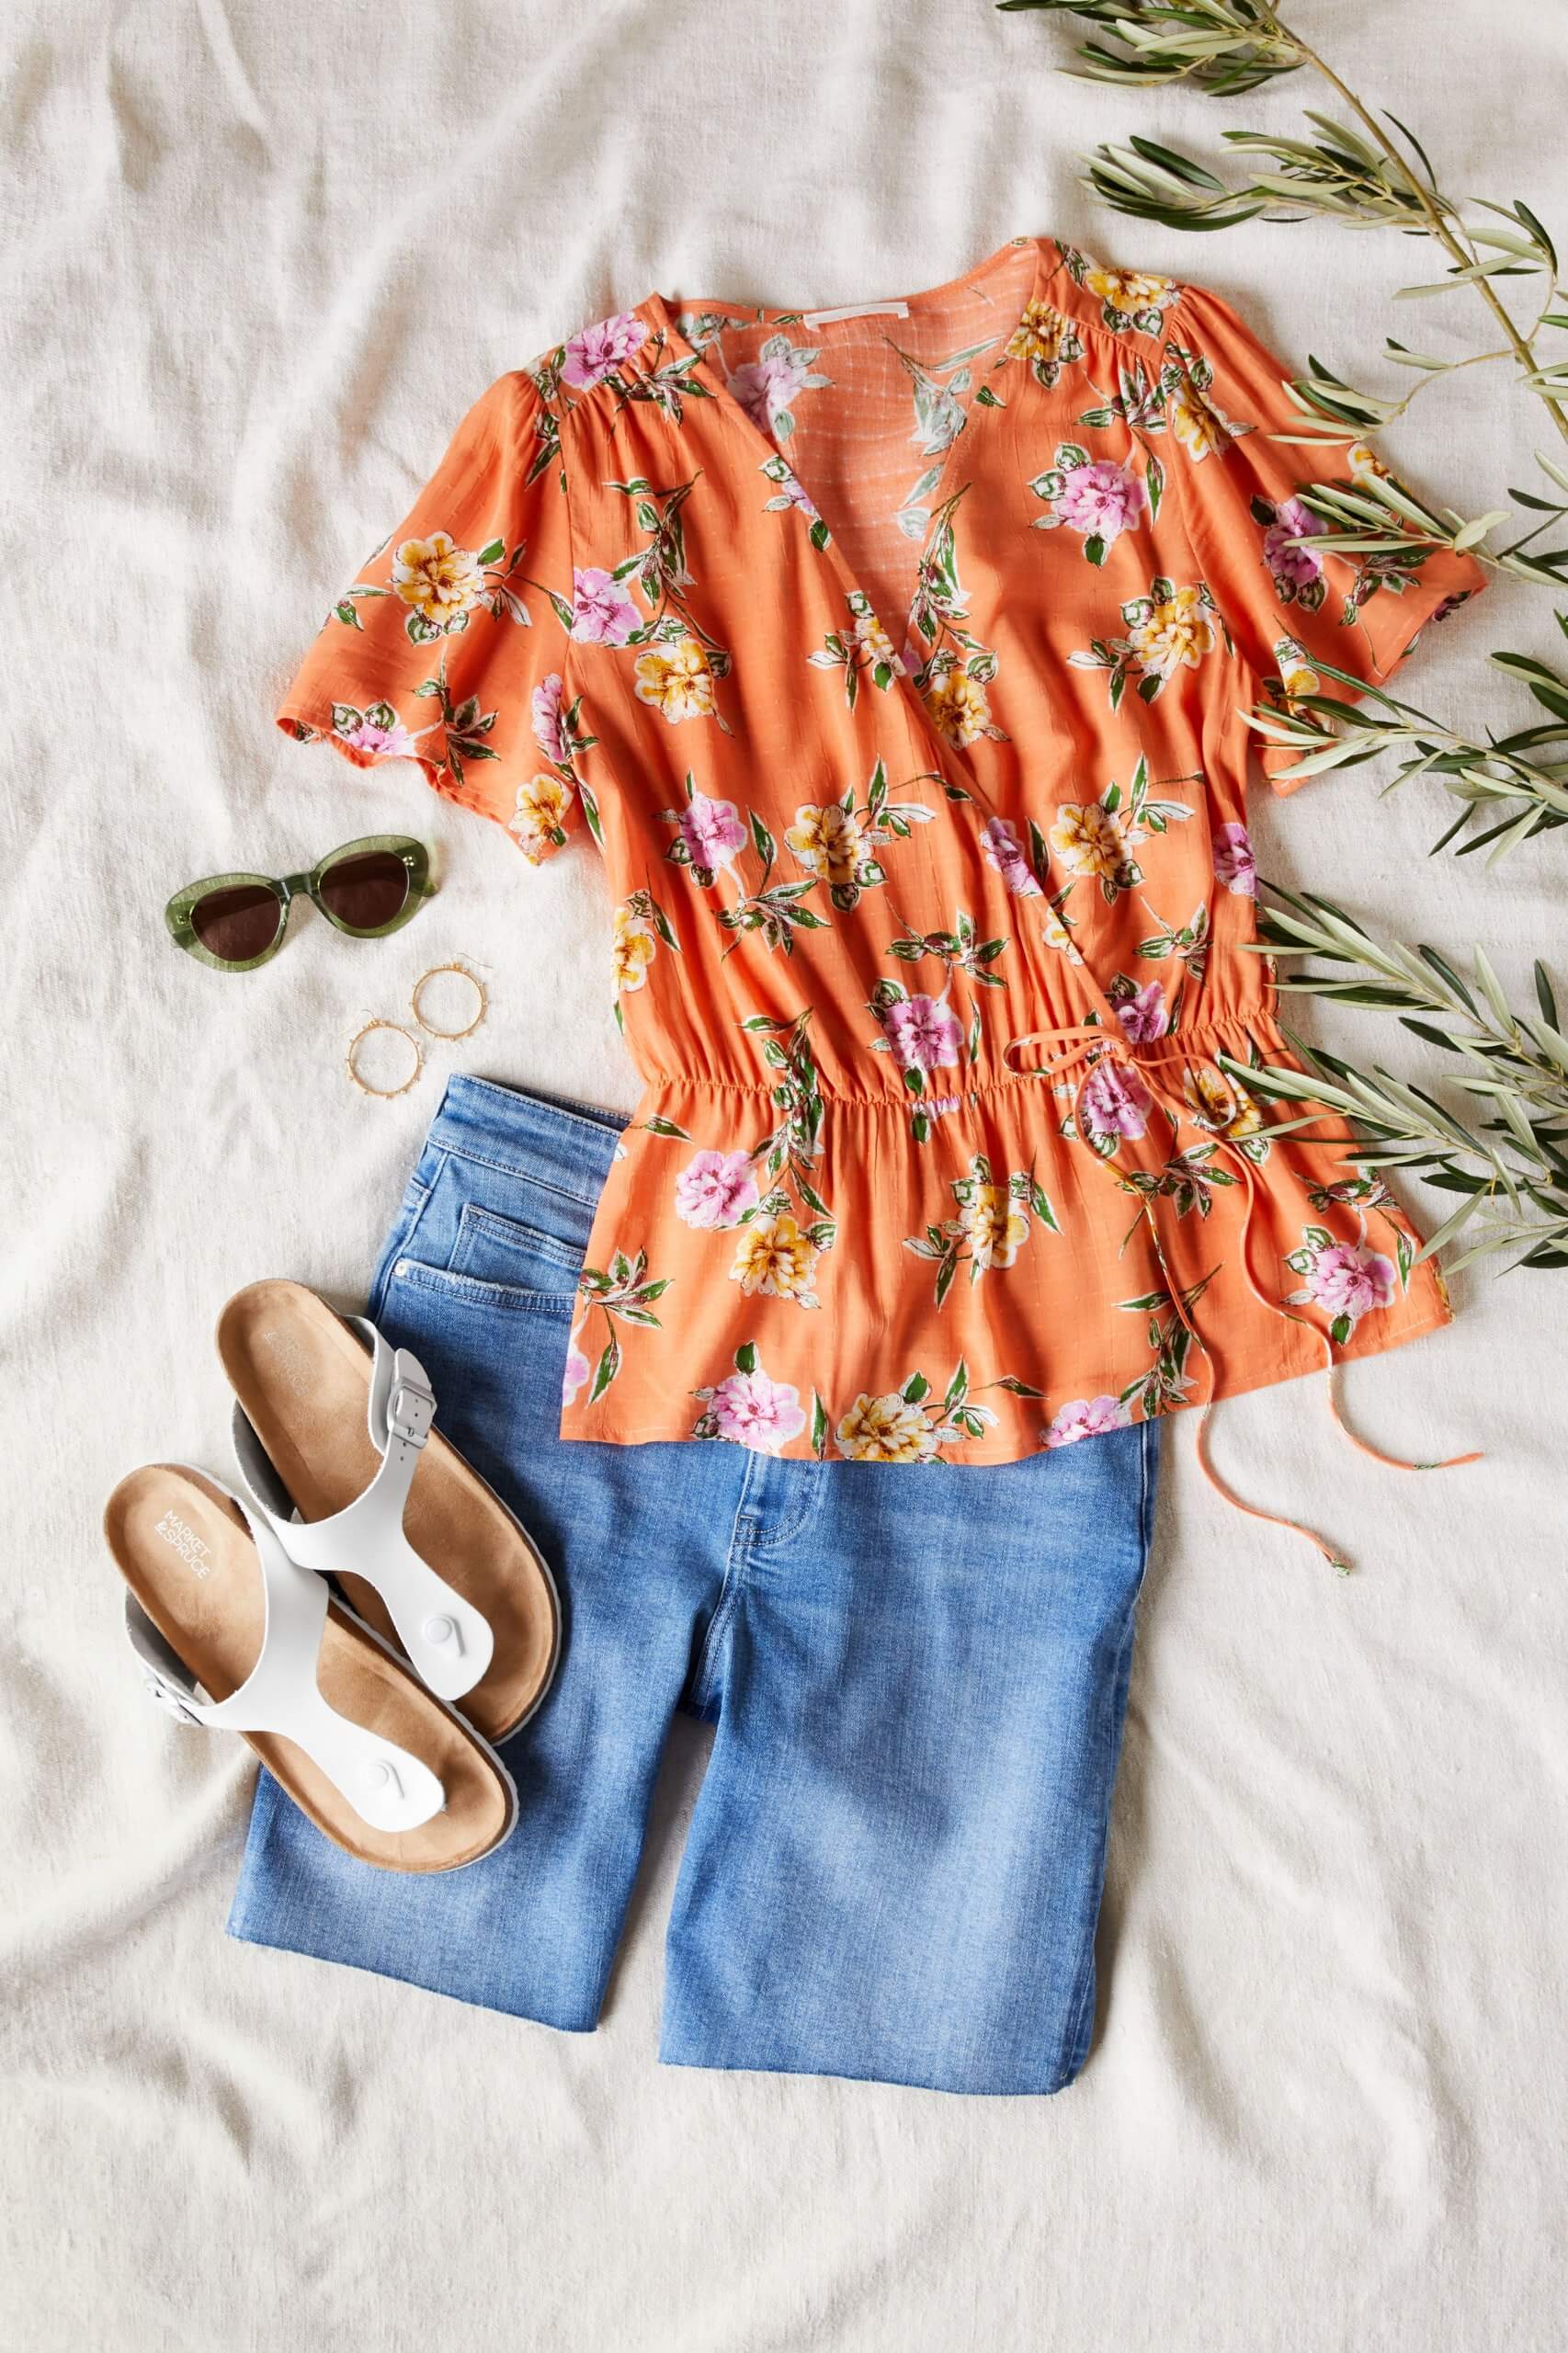 Stitch Fix Women's outfit laydown featuring orange floral wrap shirt, blue bermuda denim shorts, gold hoop earrings, white sandals and sunglasses. 